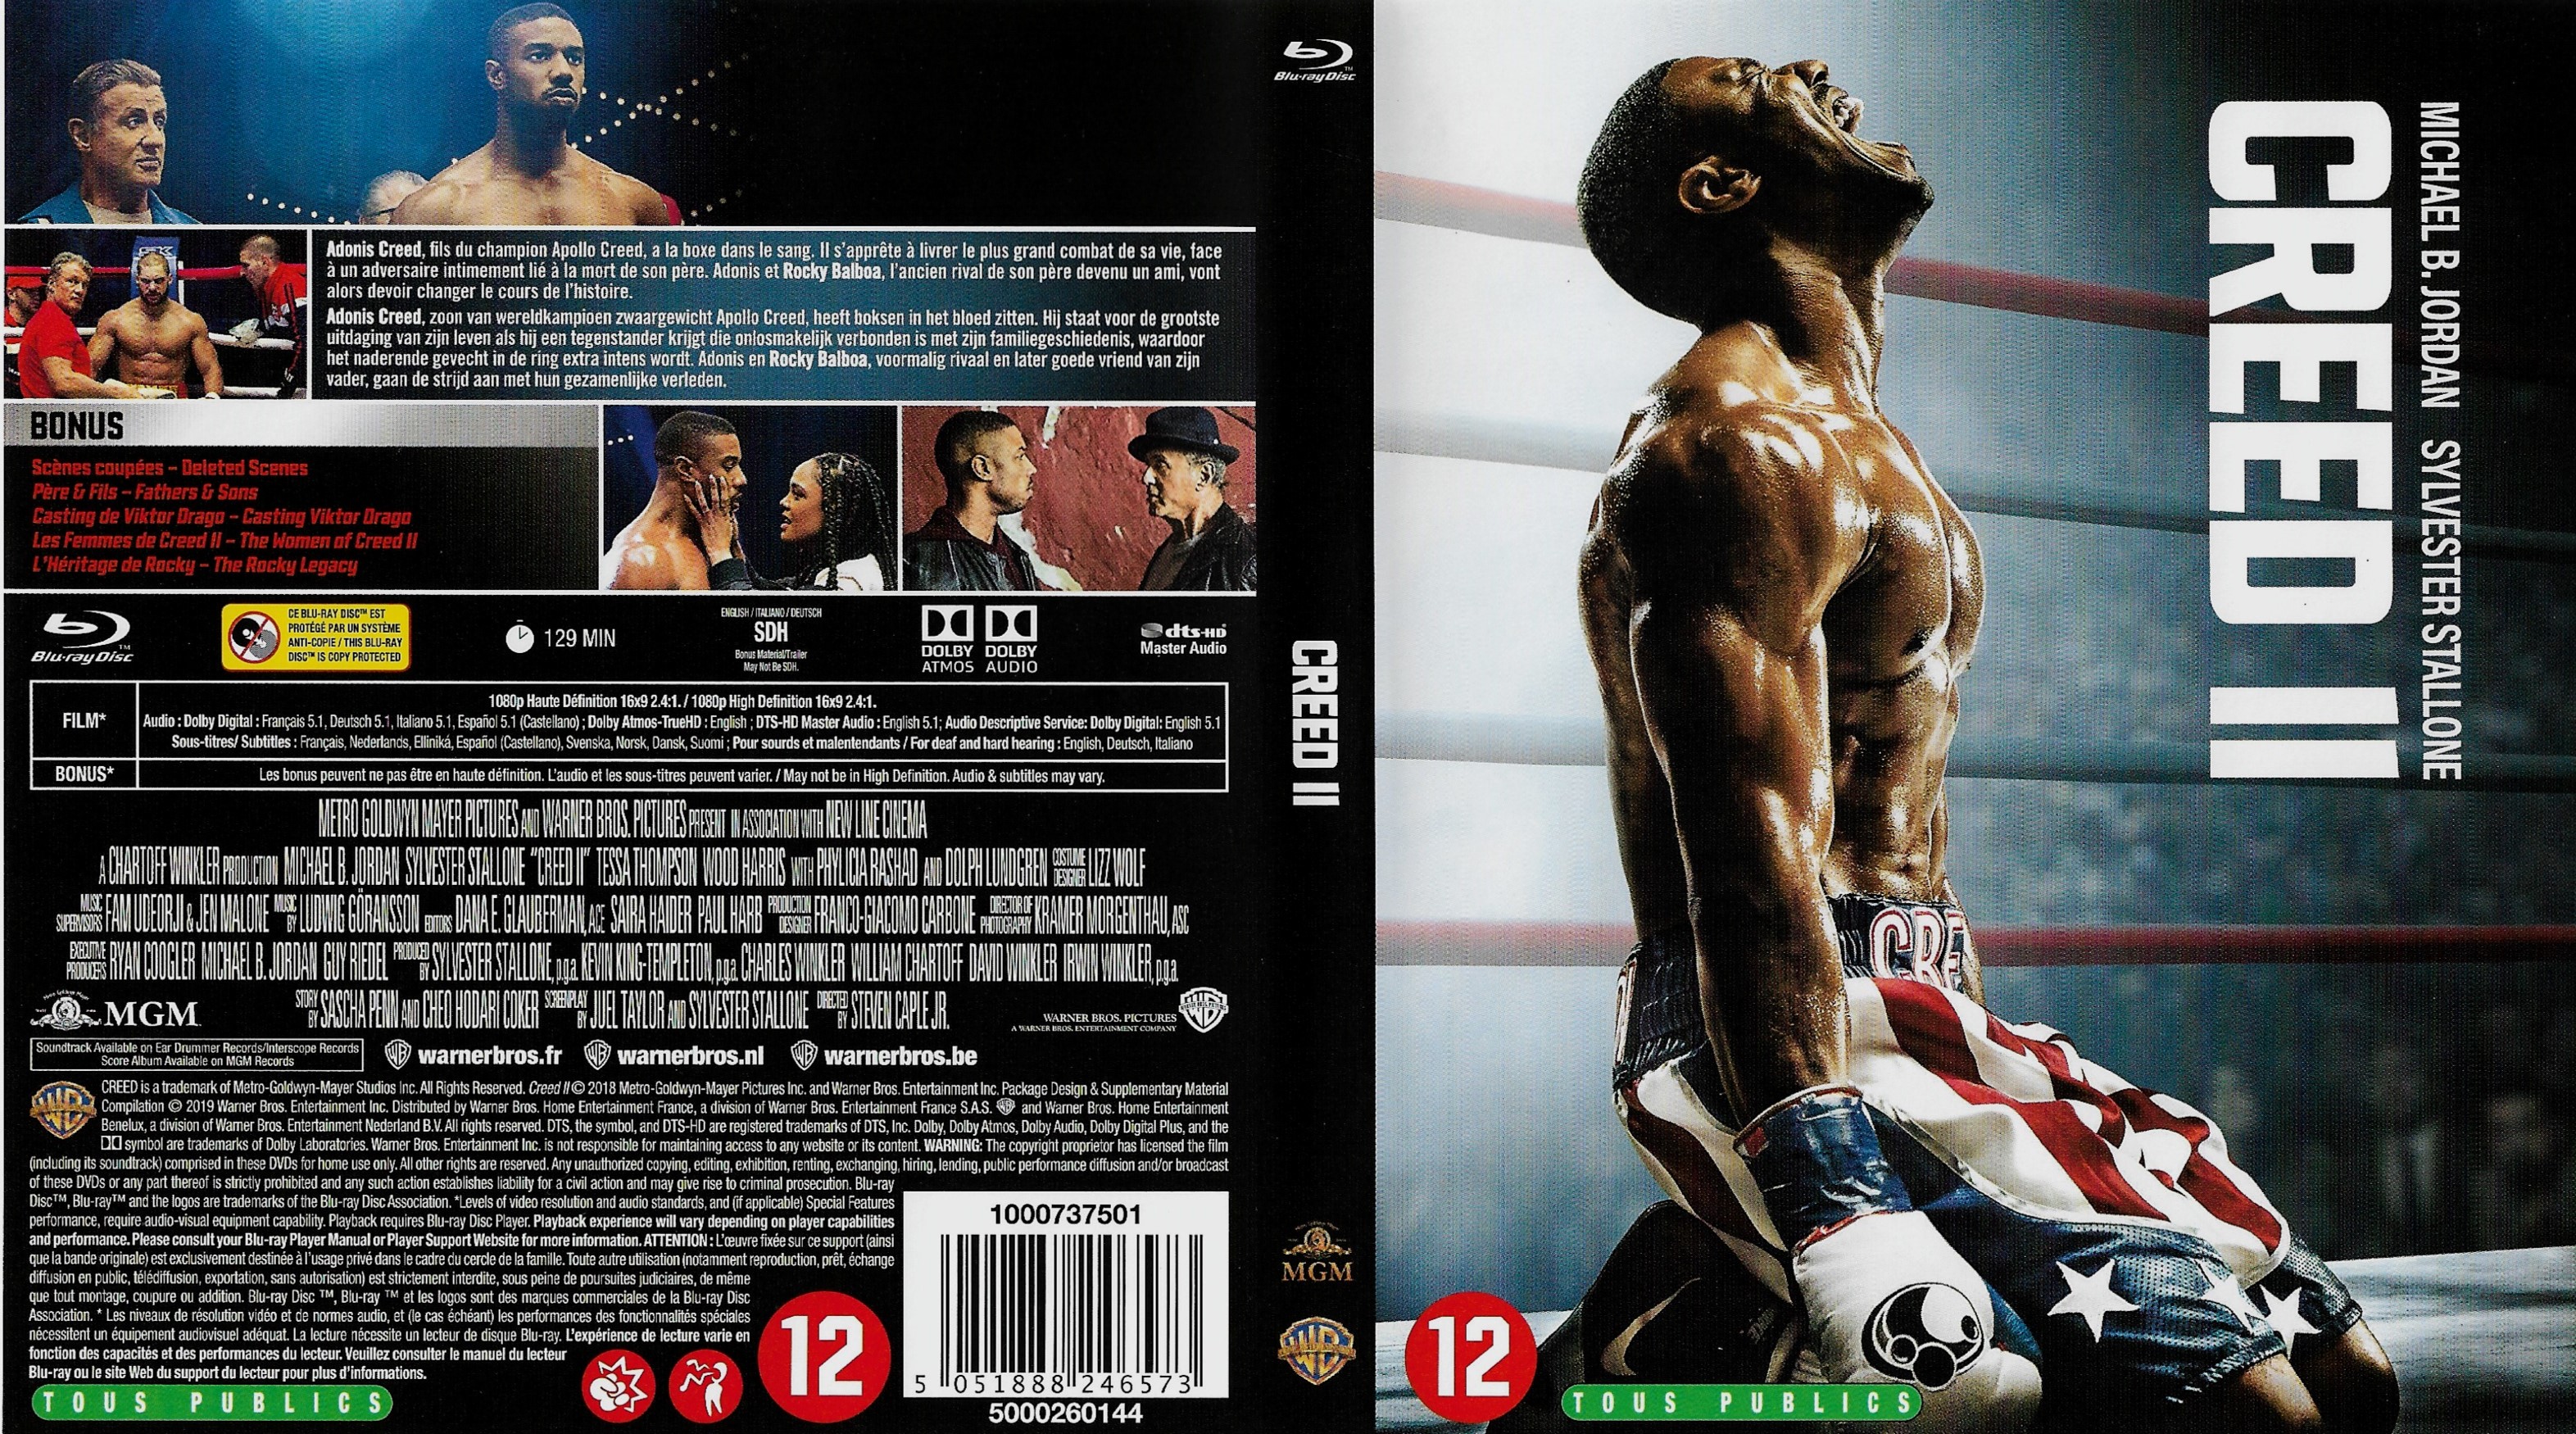 Jaquette DVD Creed 2 (BLU-RAY)